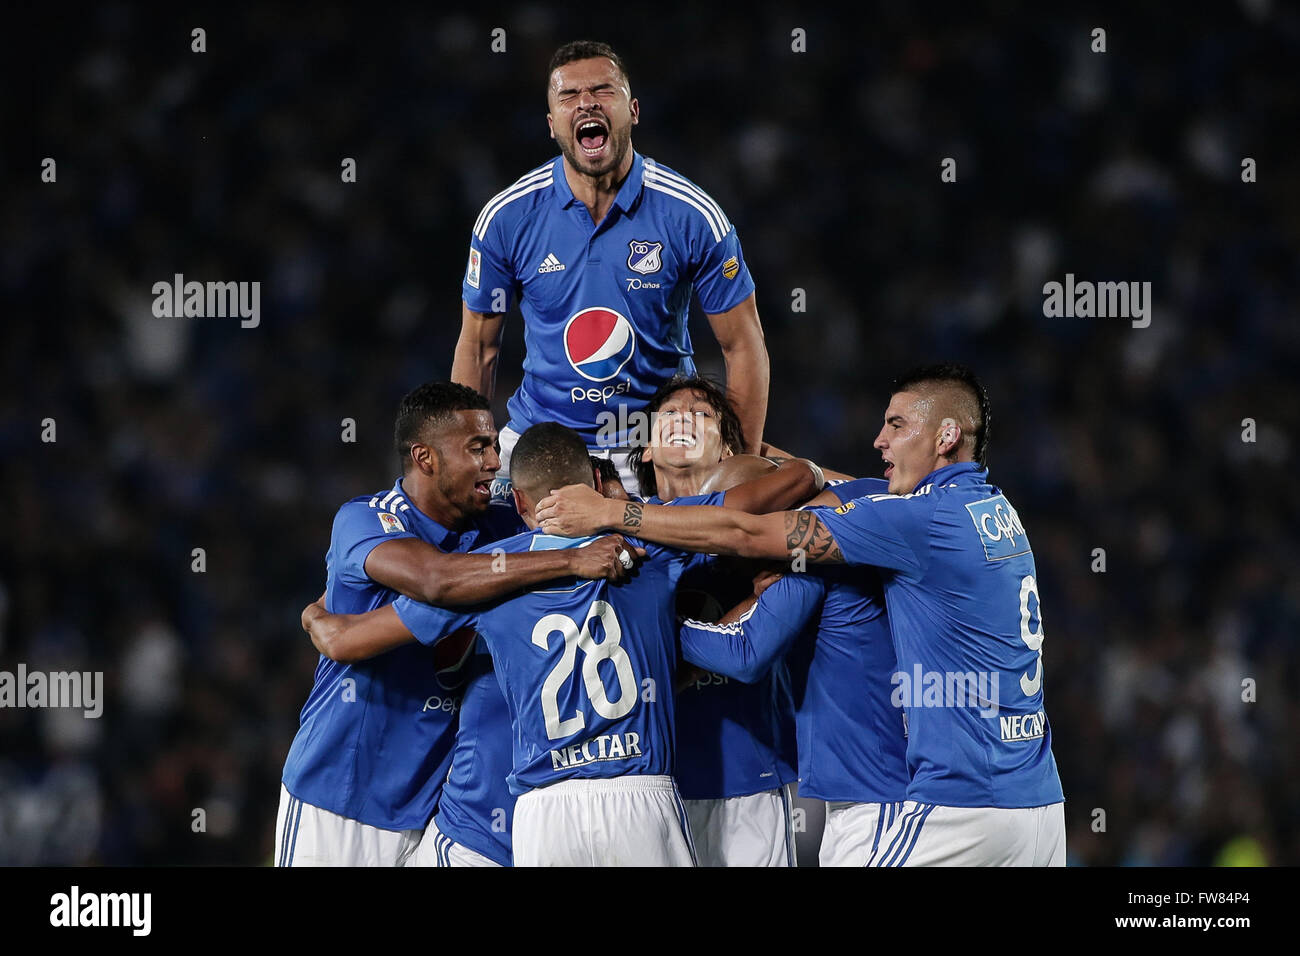 Bogota, Colombia. 31st Mar, 2016. Millonarios' players celebrate scoring during the postponed match of the Aguila League of Colombian professional soccer, against Atletico Nacional, at Nemesio Camacho 'El Campin' stadium, in Bogota city, Colombia, on March 31, 2016. Millonarios won 2-1. © Jhon Paz/Xinhua/Alamy Live News Stock Photo